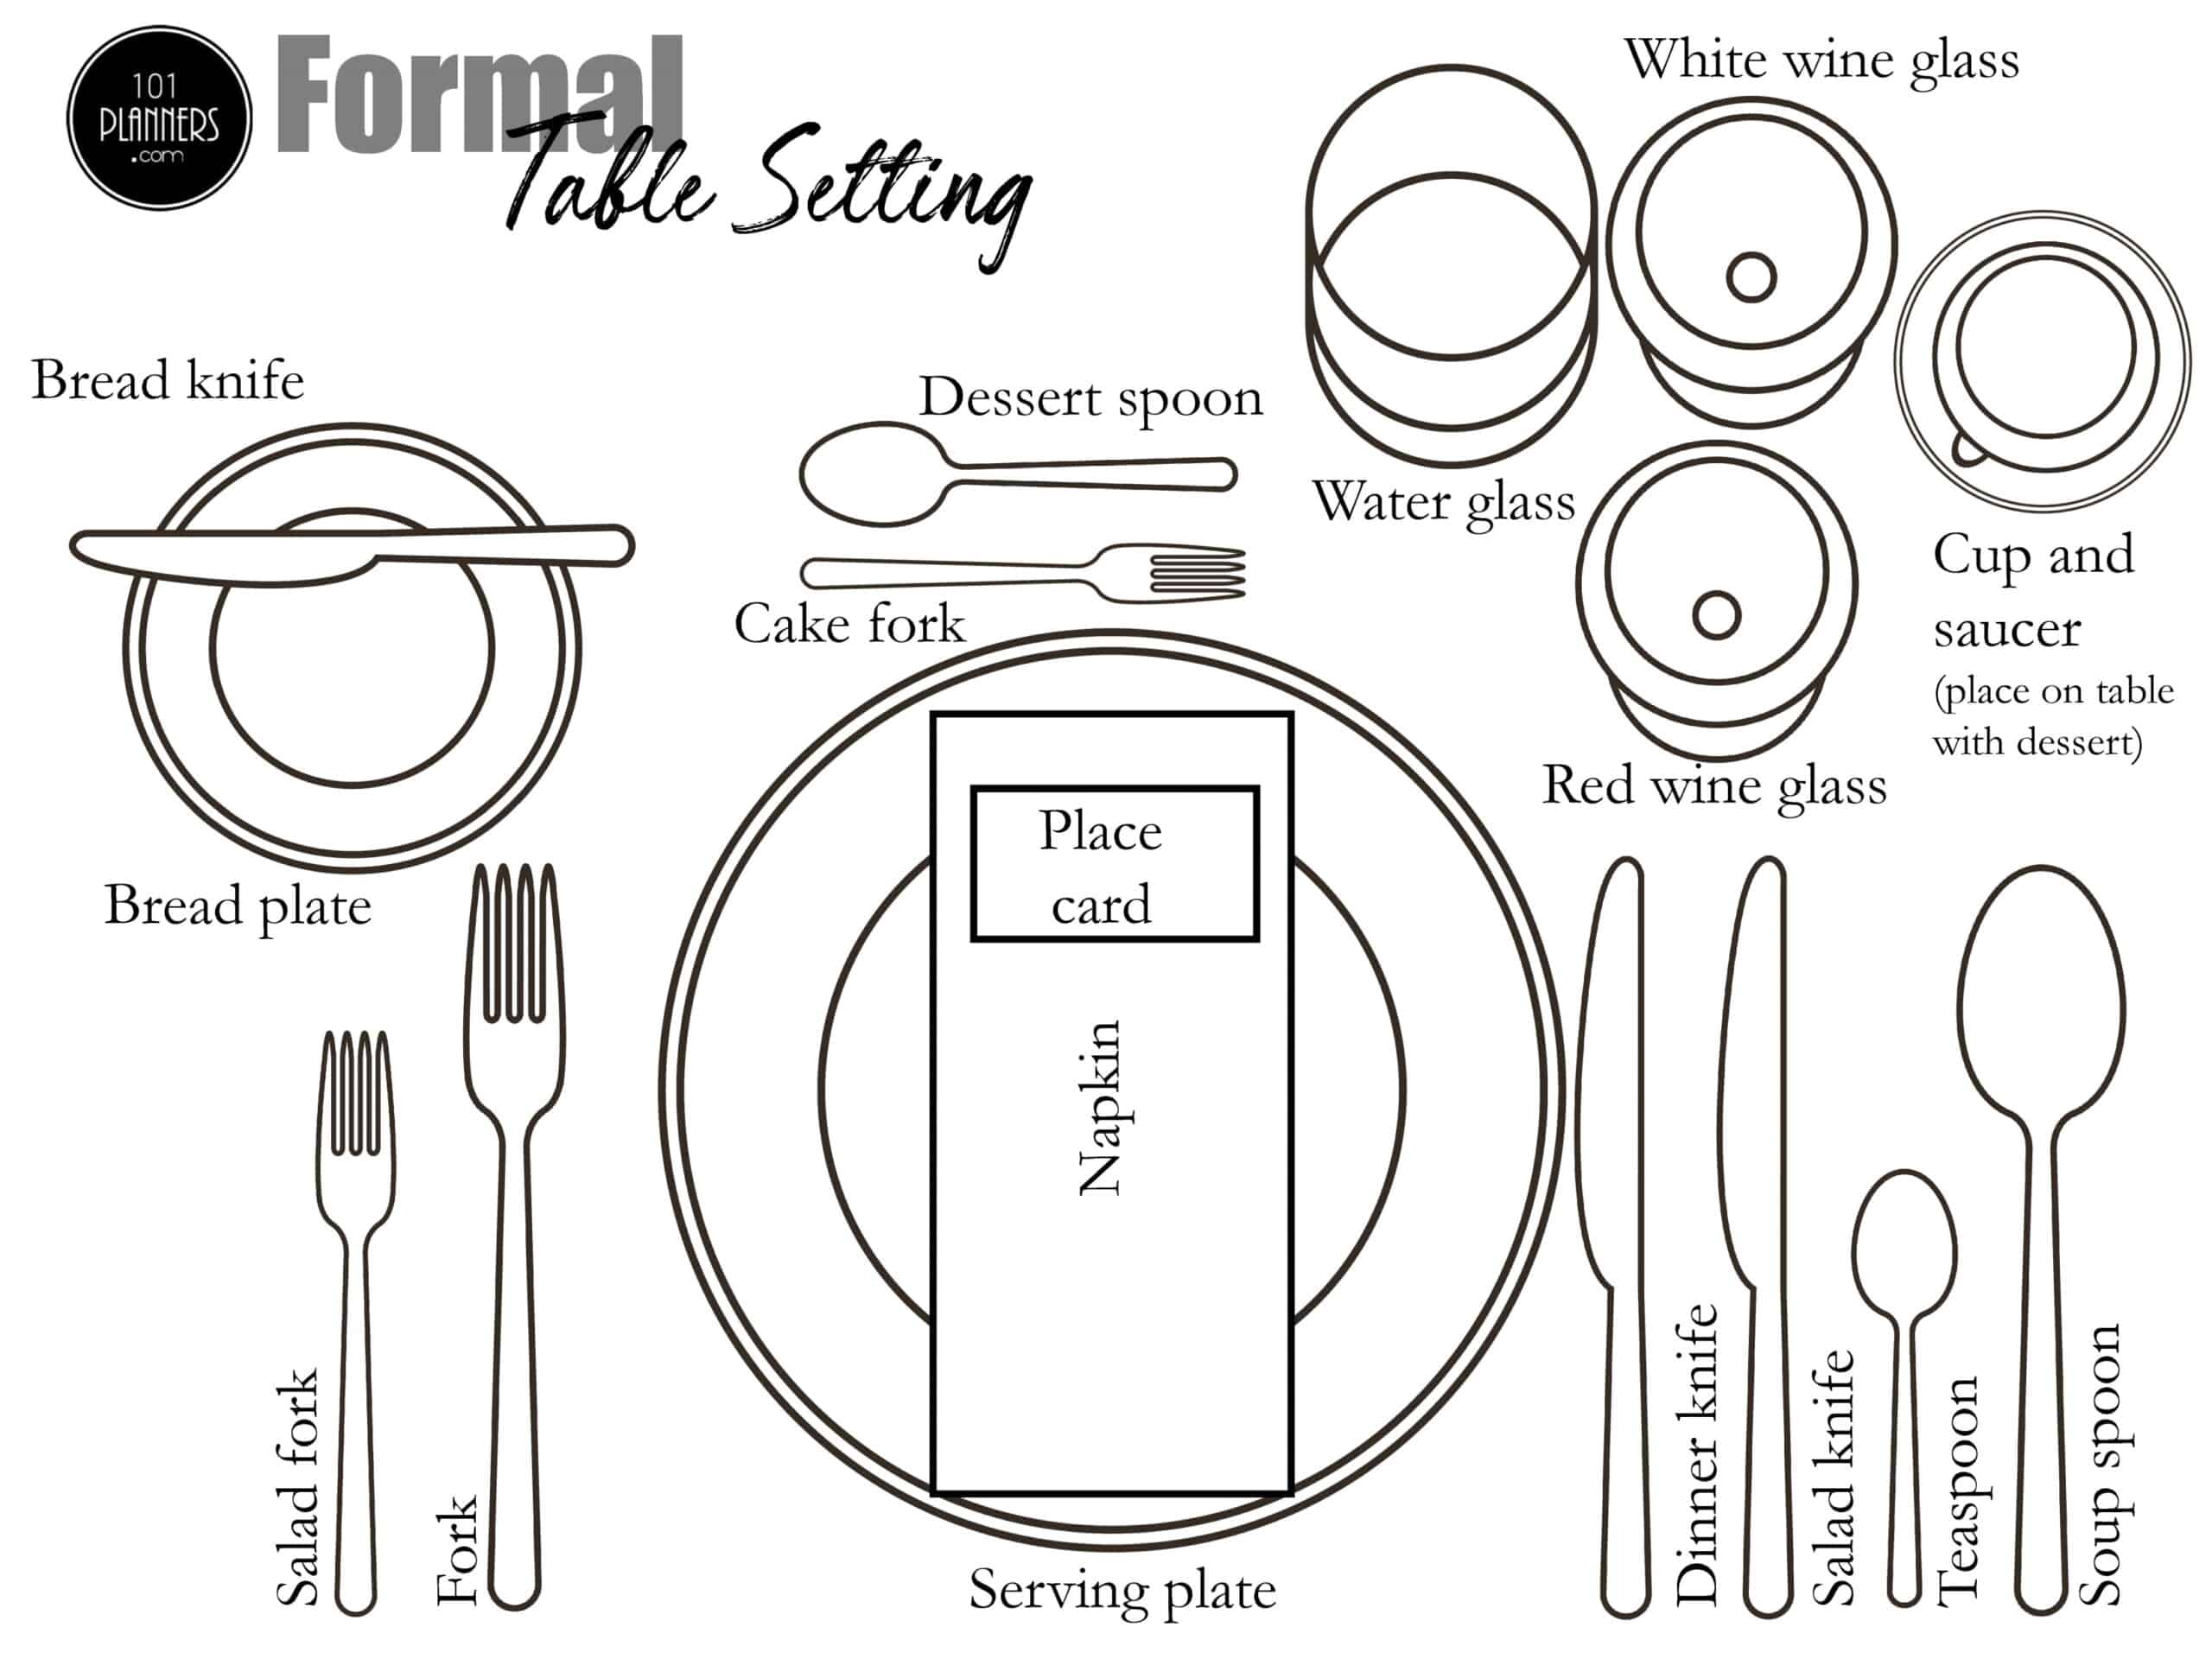 how-to-set-a-table-with-5-place-setting-templates-for-every-event